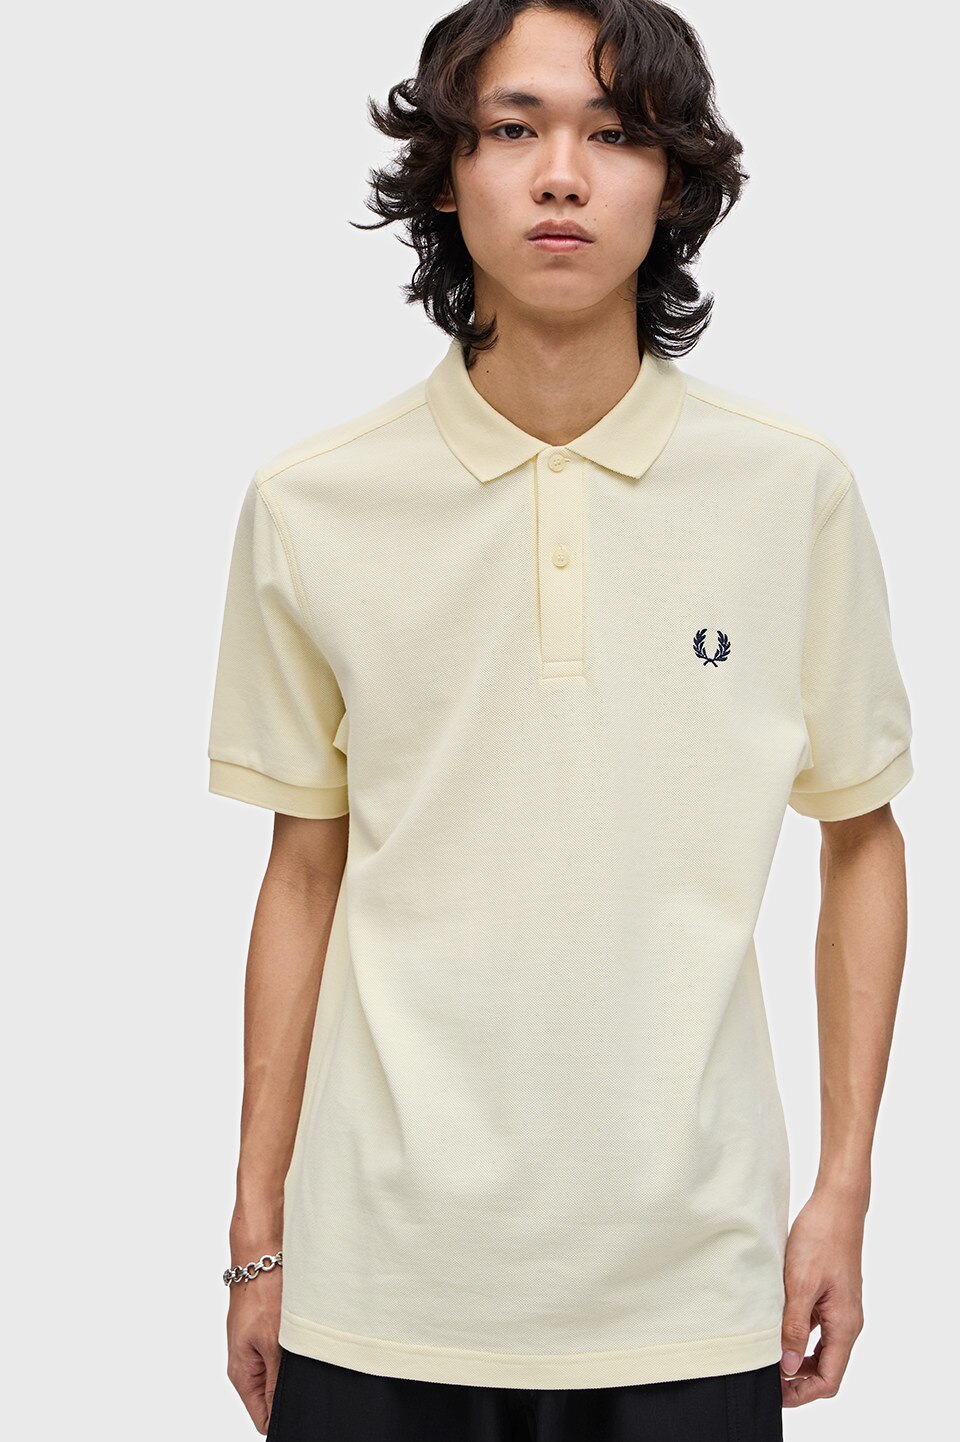 The Fred Perry Shirt - M6000|FRED PERRY(フレッドペリー)の通販